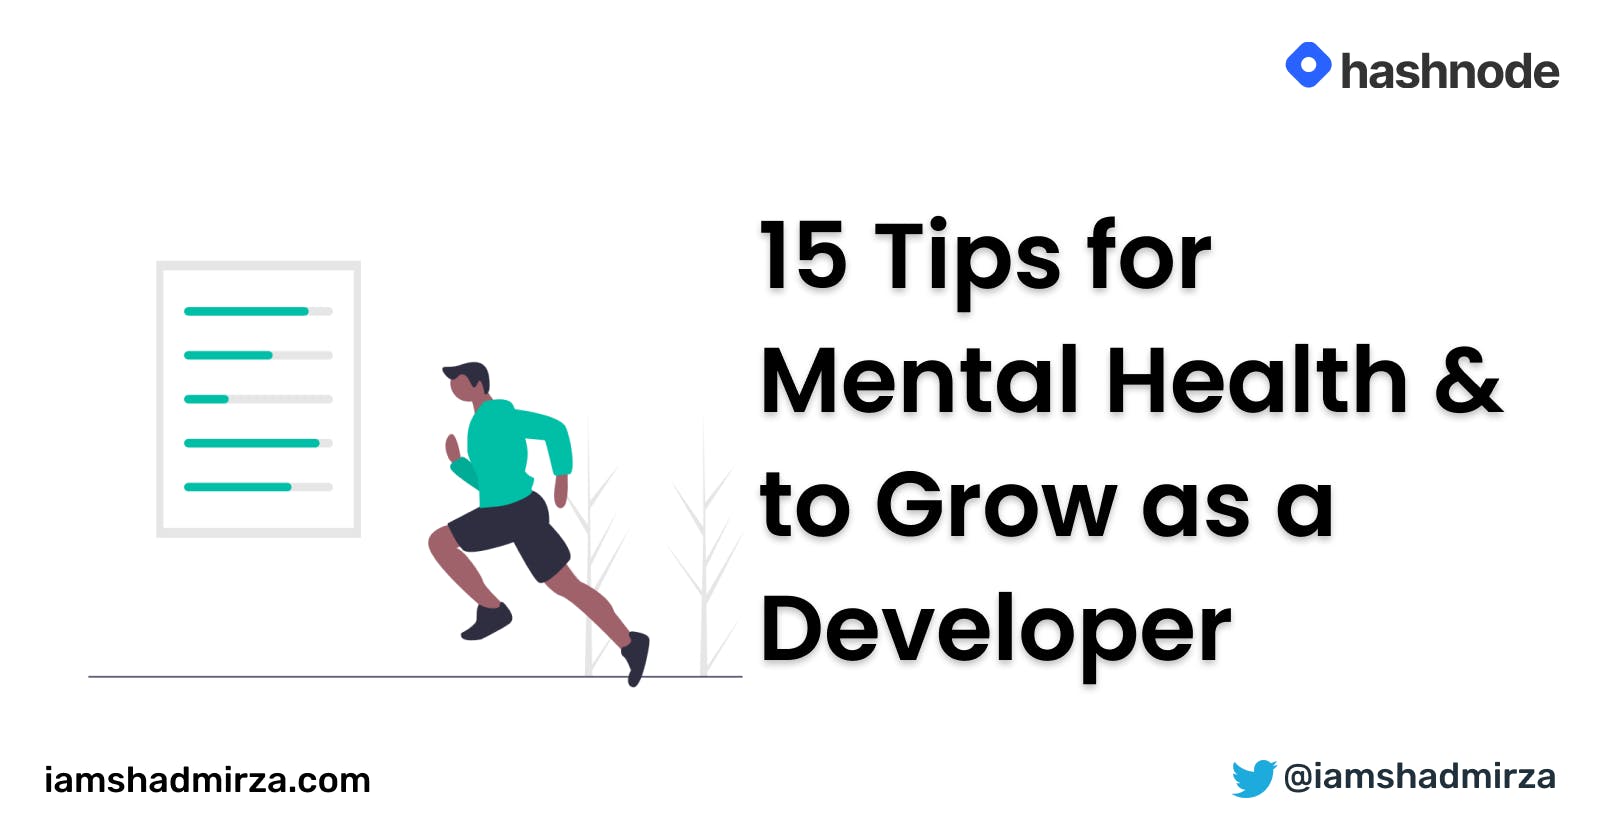 15 Tips for Mental Health & to Grow as a Developer